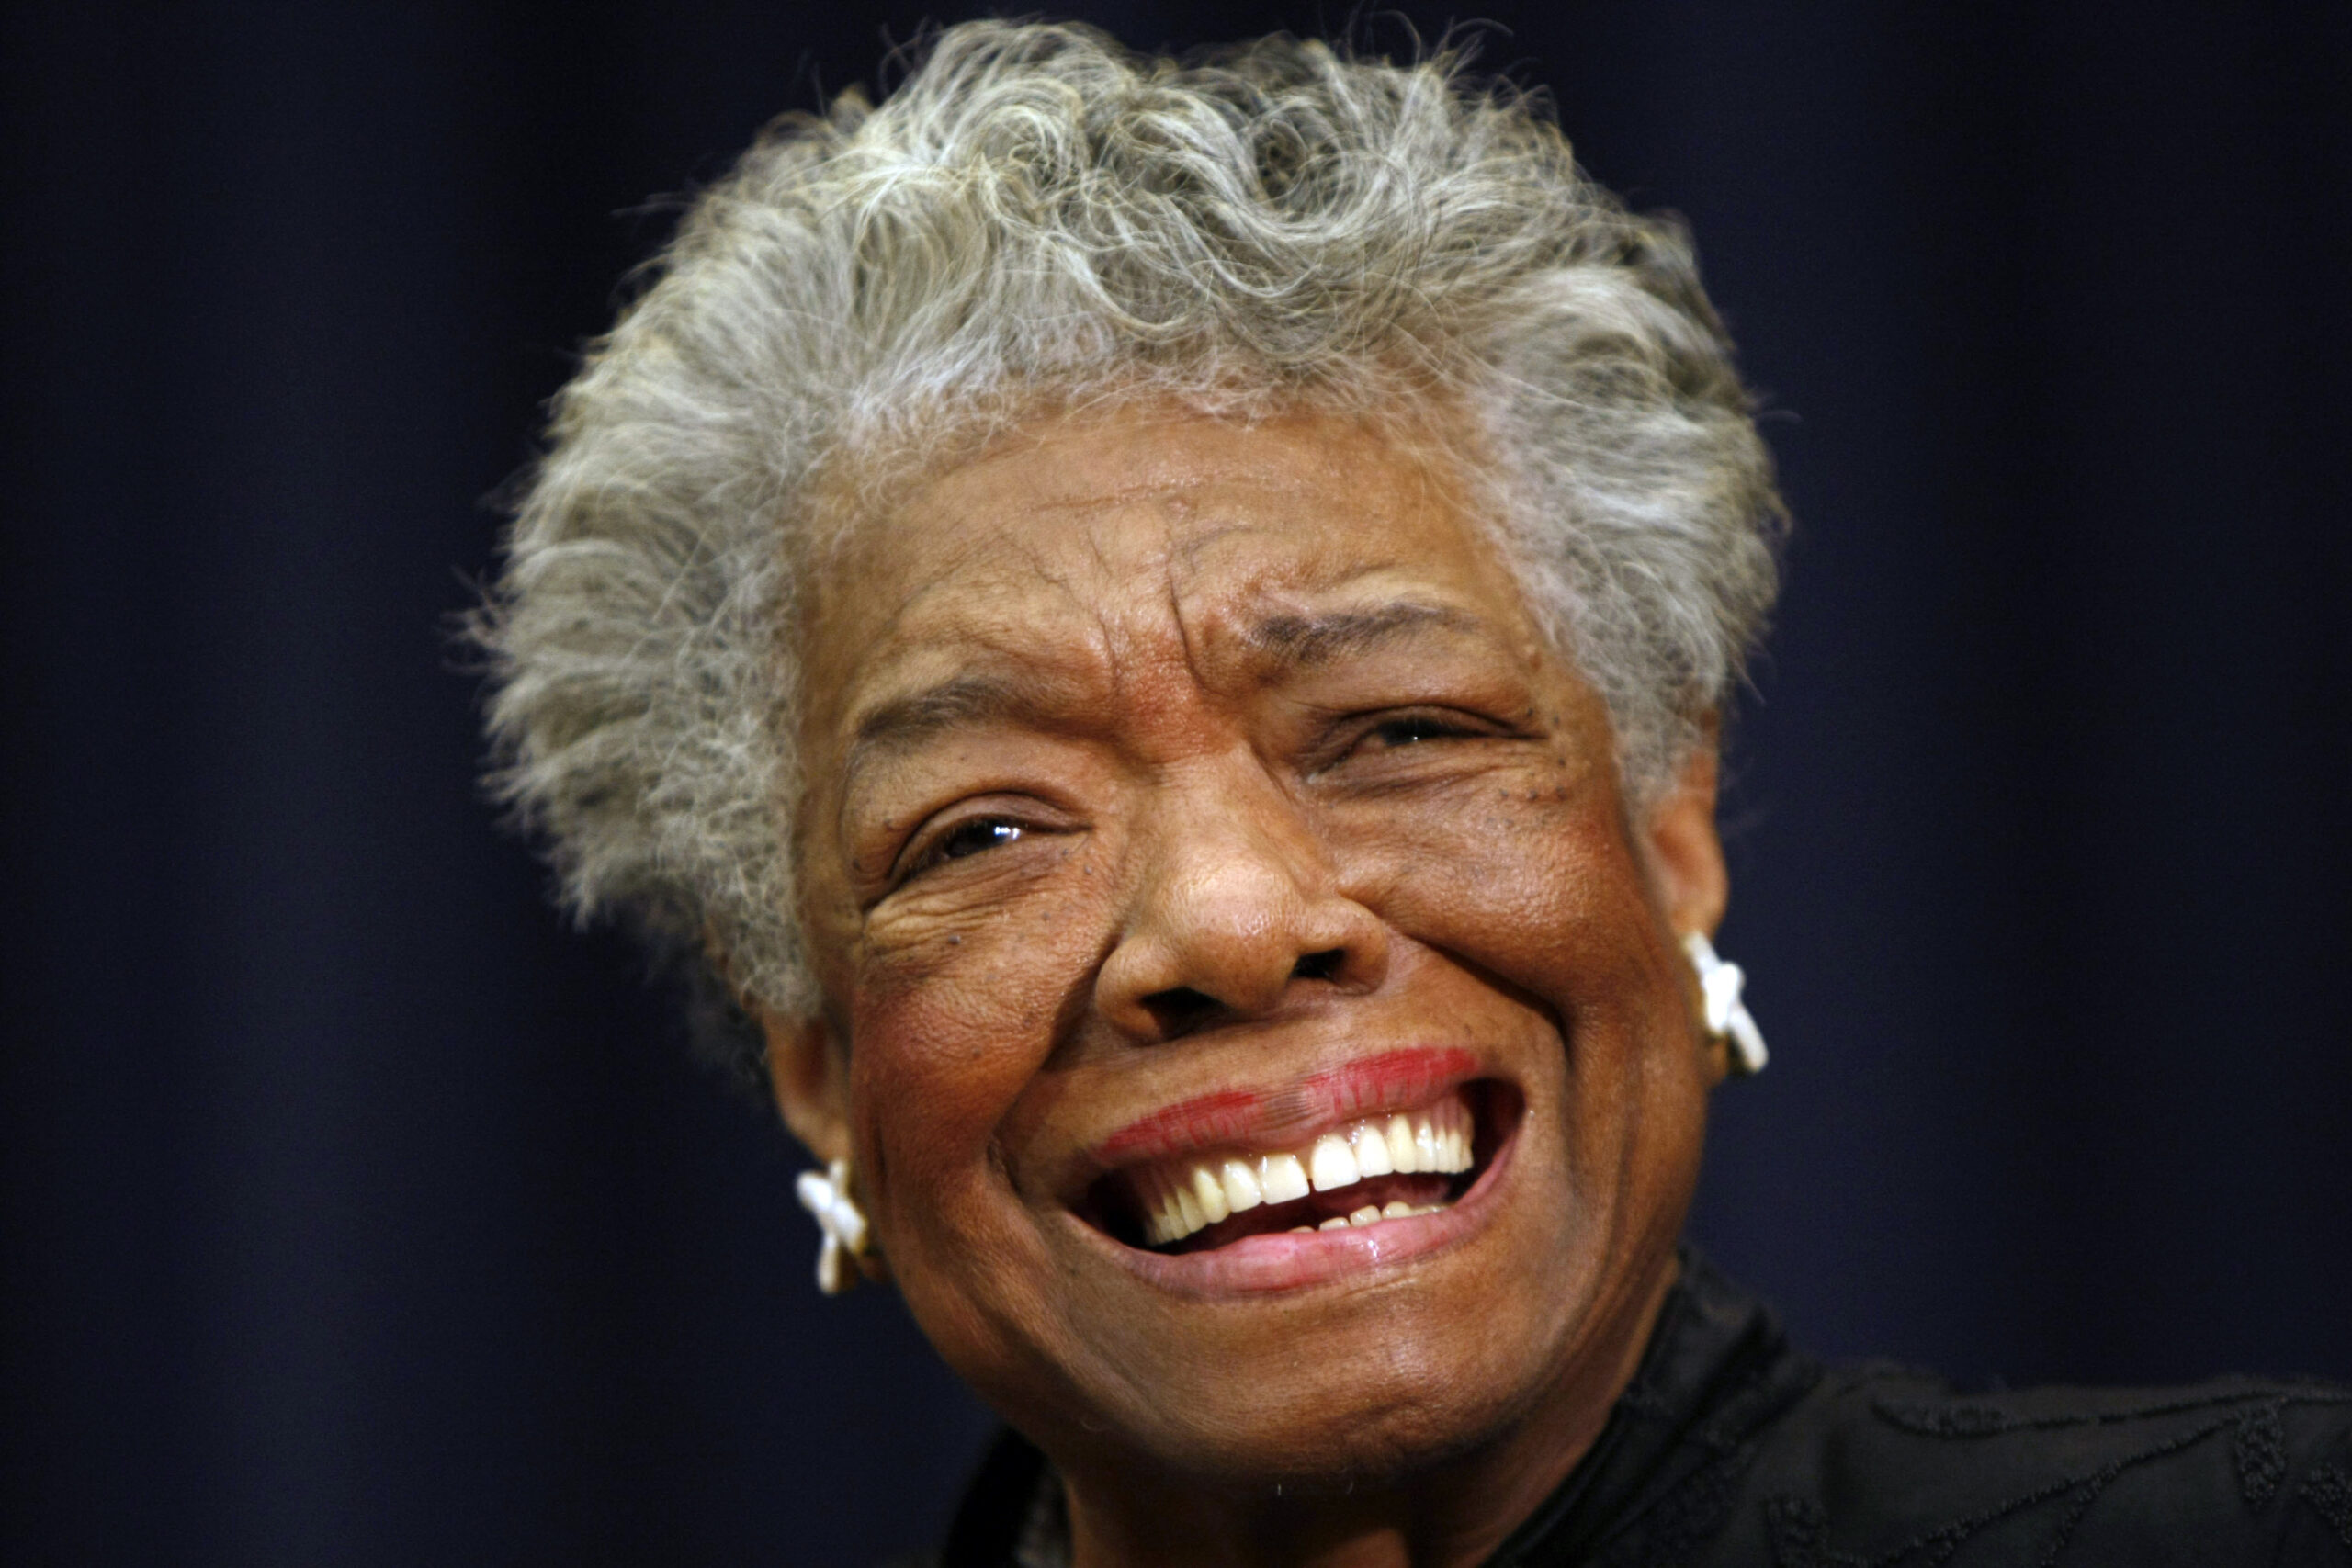 FILE - In this Nov. 21, 2008, file photo, poet Maya Angelou smiles at an event in Washington. On Monday, Jan. 10, 2022, the United States Mint said it has begun shipping quarters featuring the image of poet Maya Angelou, the first coins in its American Women Quarters Program. (AP Photo/Gerald Herbert, File)